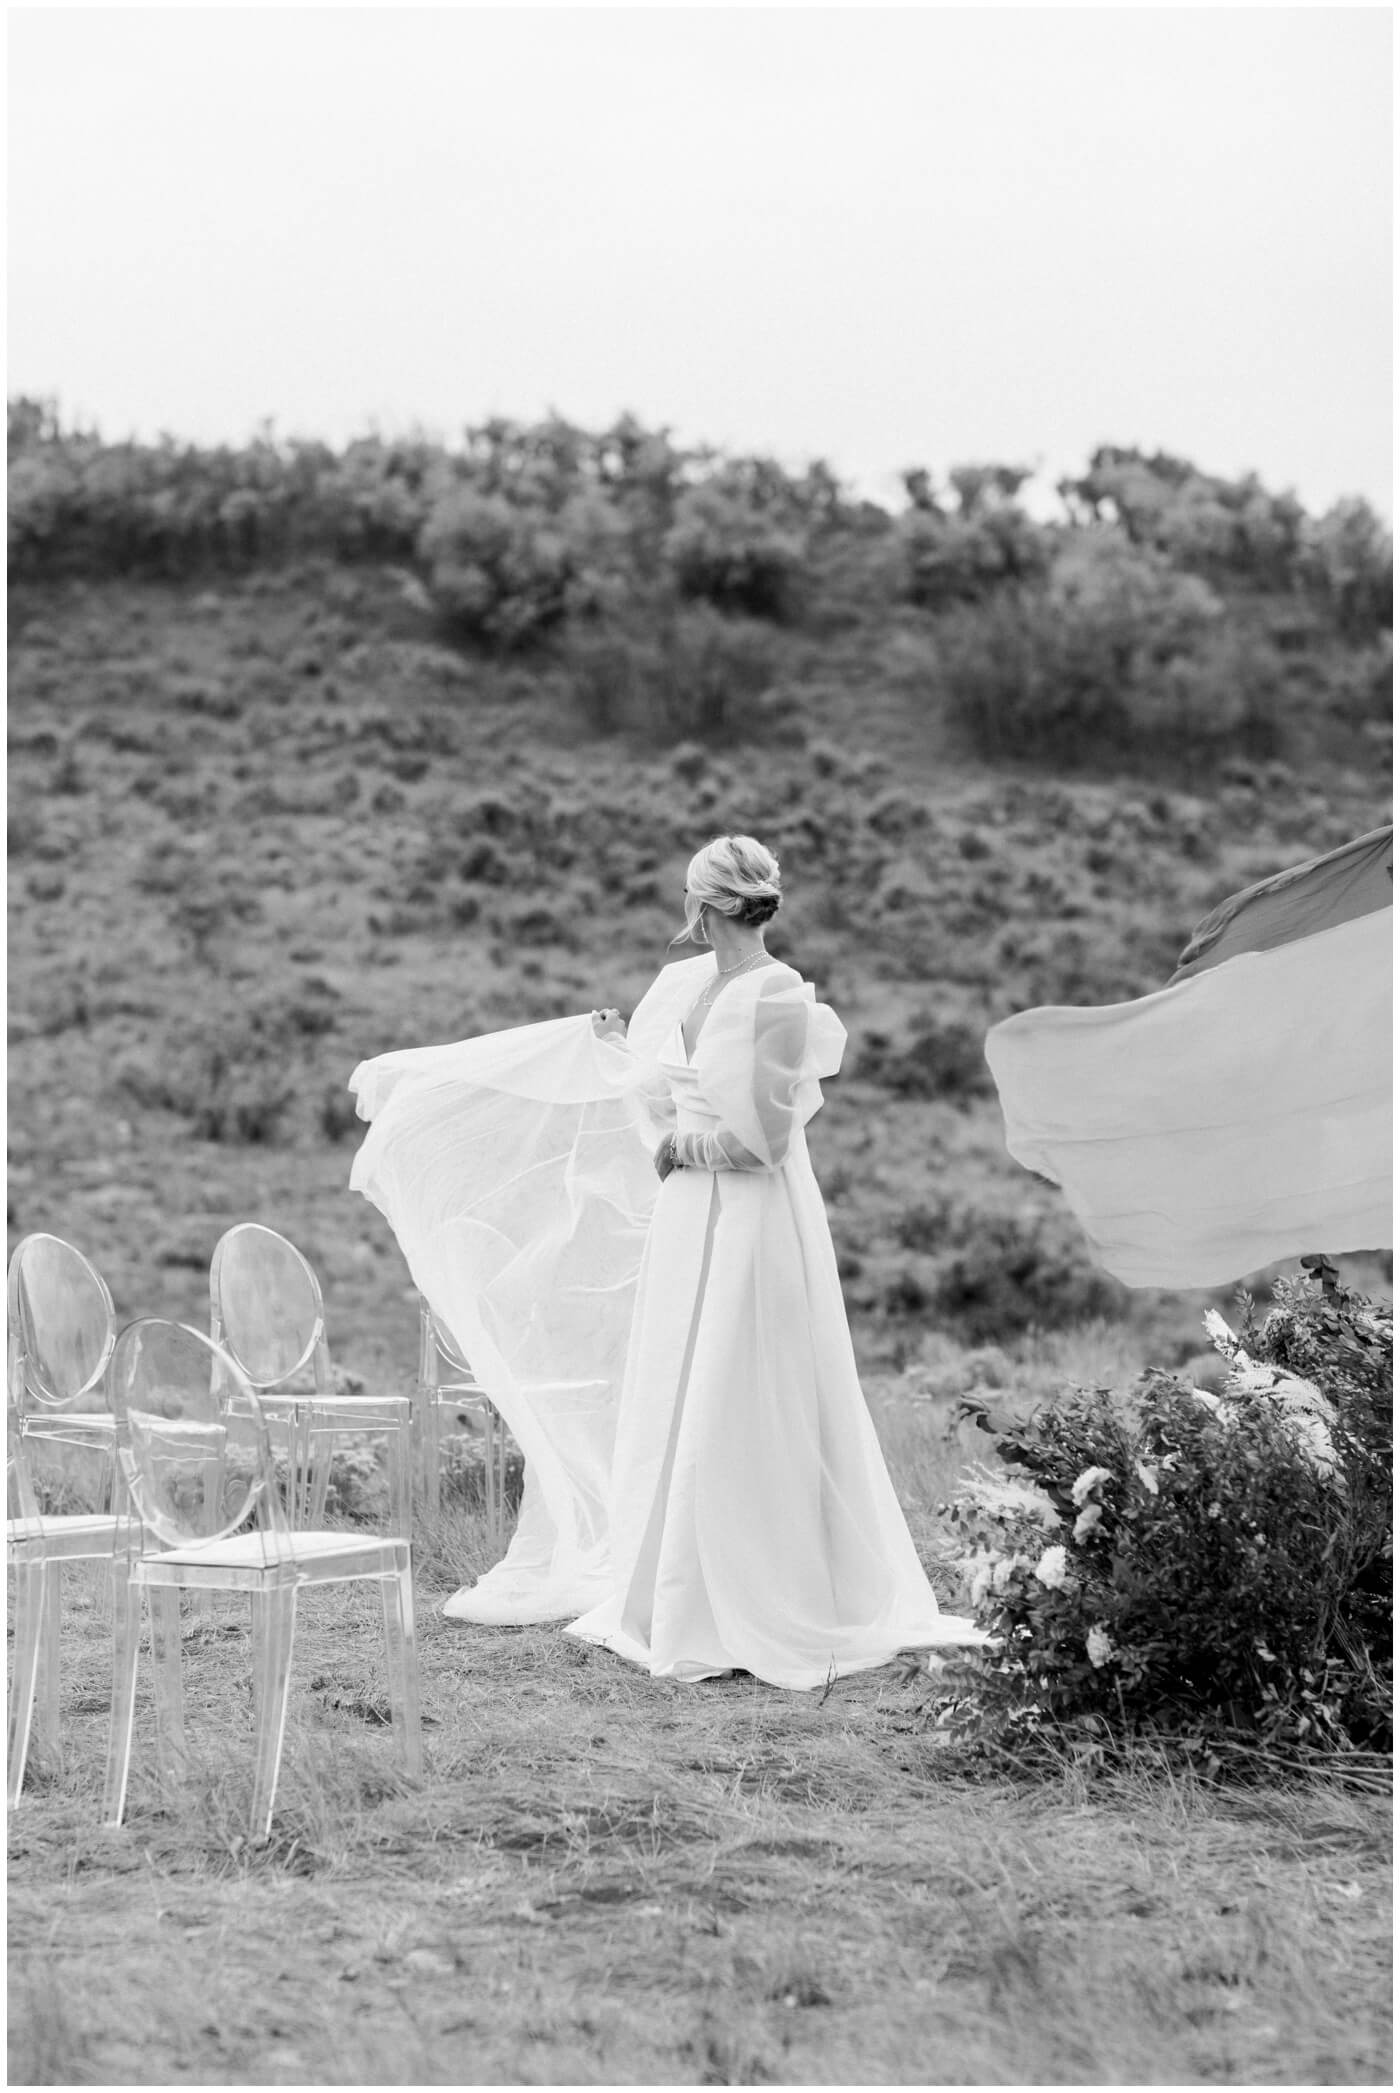 Wedding in the mountains | A bride's dress blows in the wind in the Utah mountains